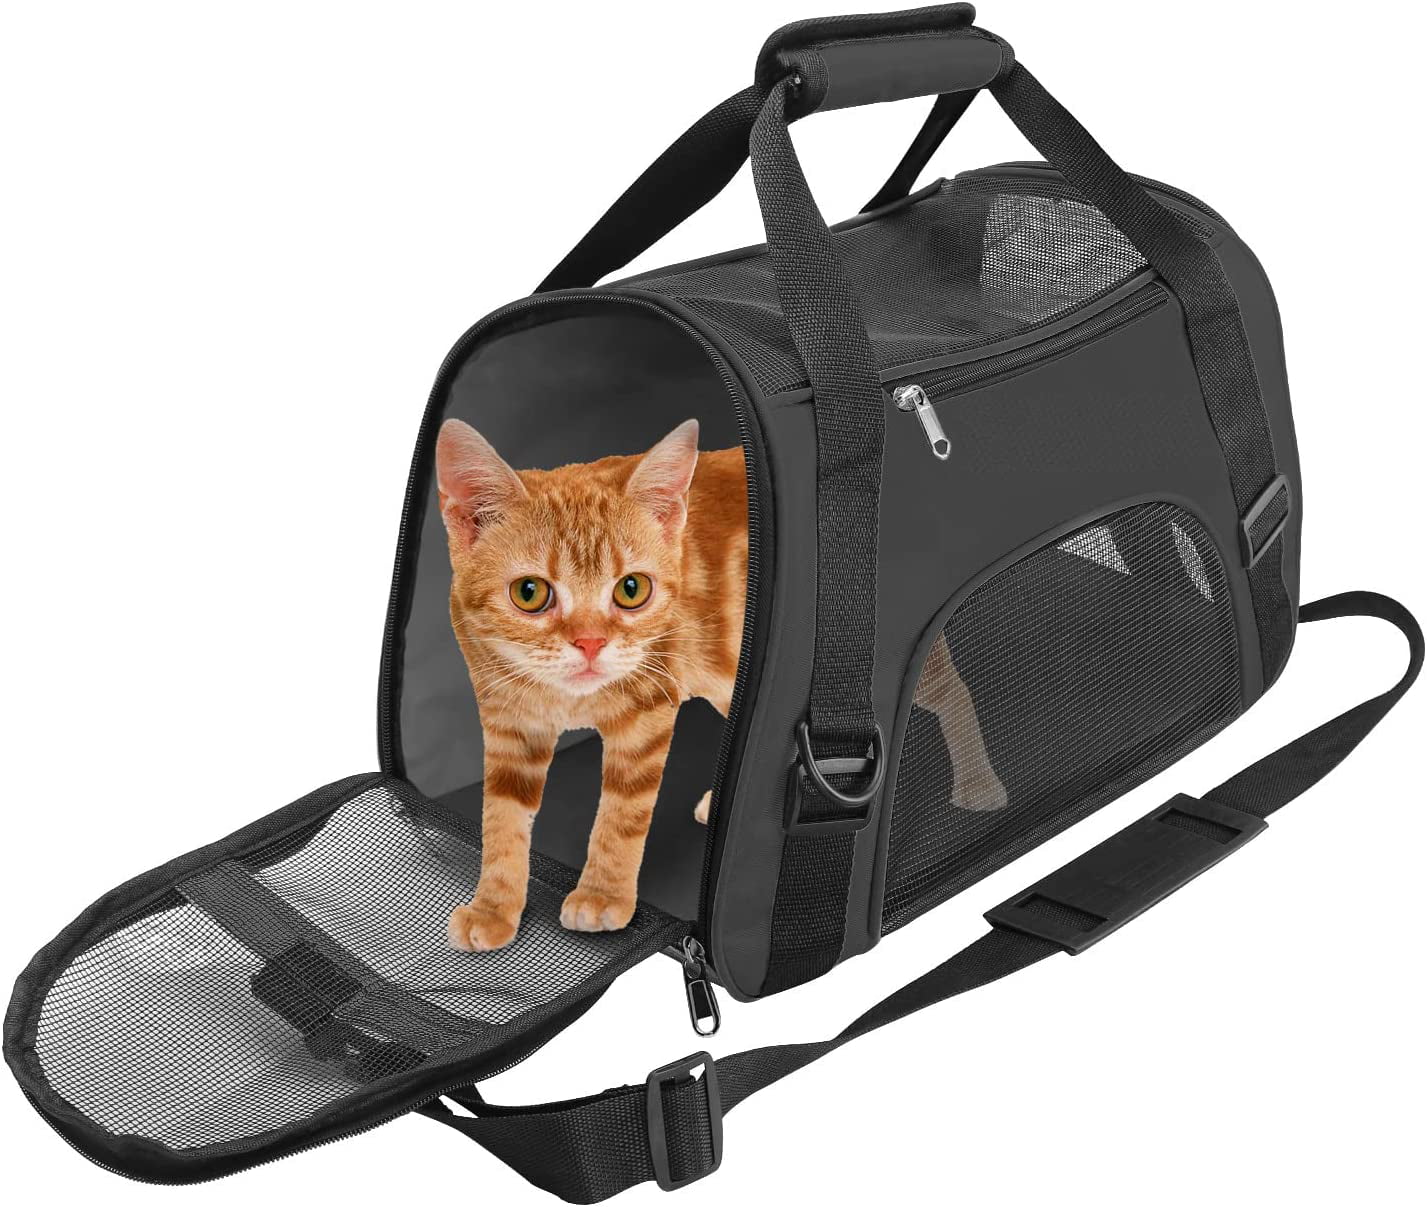  EXPAWLORER Cat Carrier Large, Soft-Sided Pet Carrier for Cat,Top  Load Cat Travel Carriers for Medium Cats Under 25, Airline Approved Pet Bag  Carriers Fit 2 Kitties Small Dogs : Pet